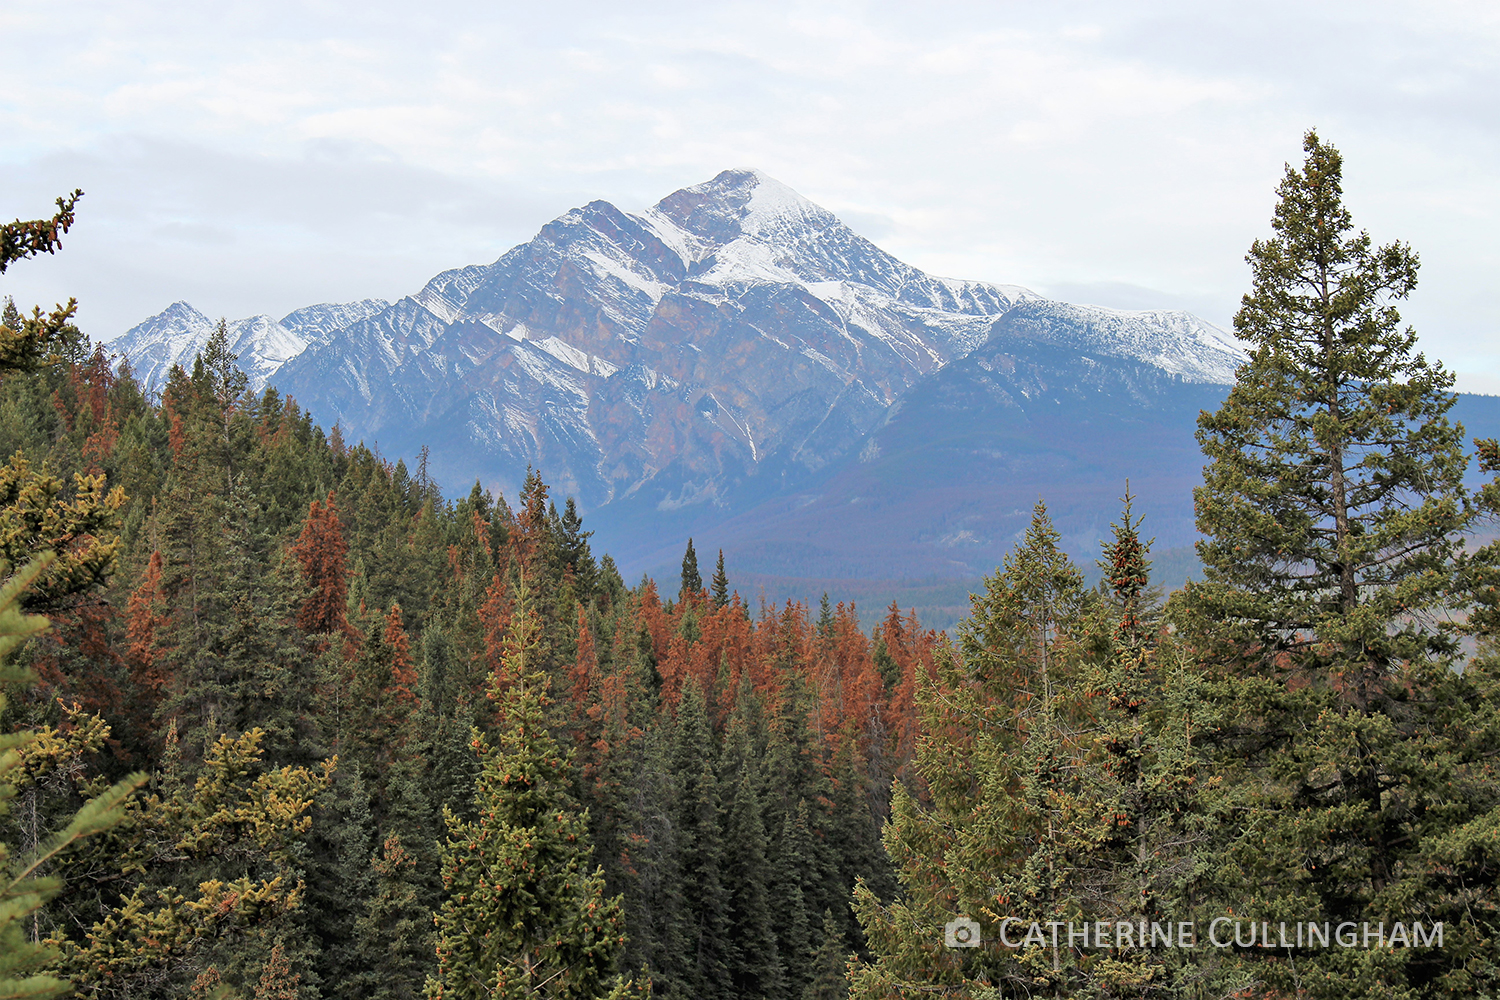 mountain with green and red attack pine trees in foreground photo credit: catherine cullingham